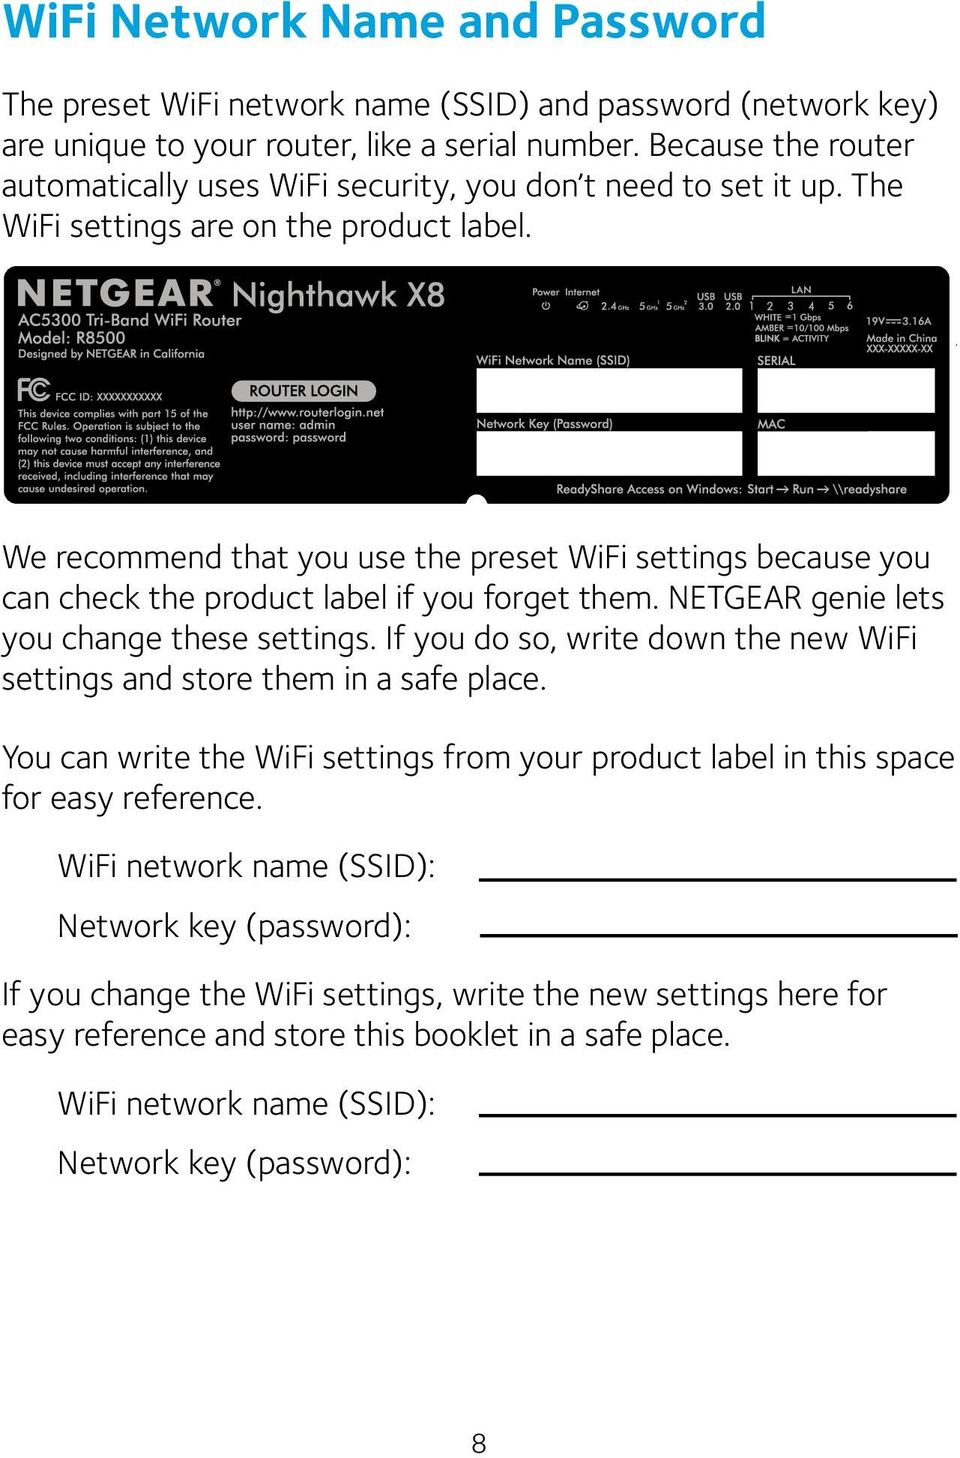 We recommend that you use the preset WiFi settings because you can check the product label if you forget them. NETGEAR genie lets you change these settings.